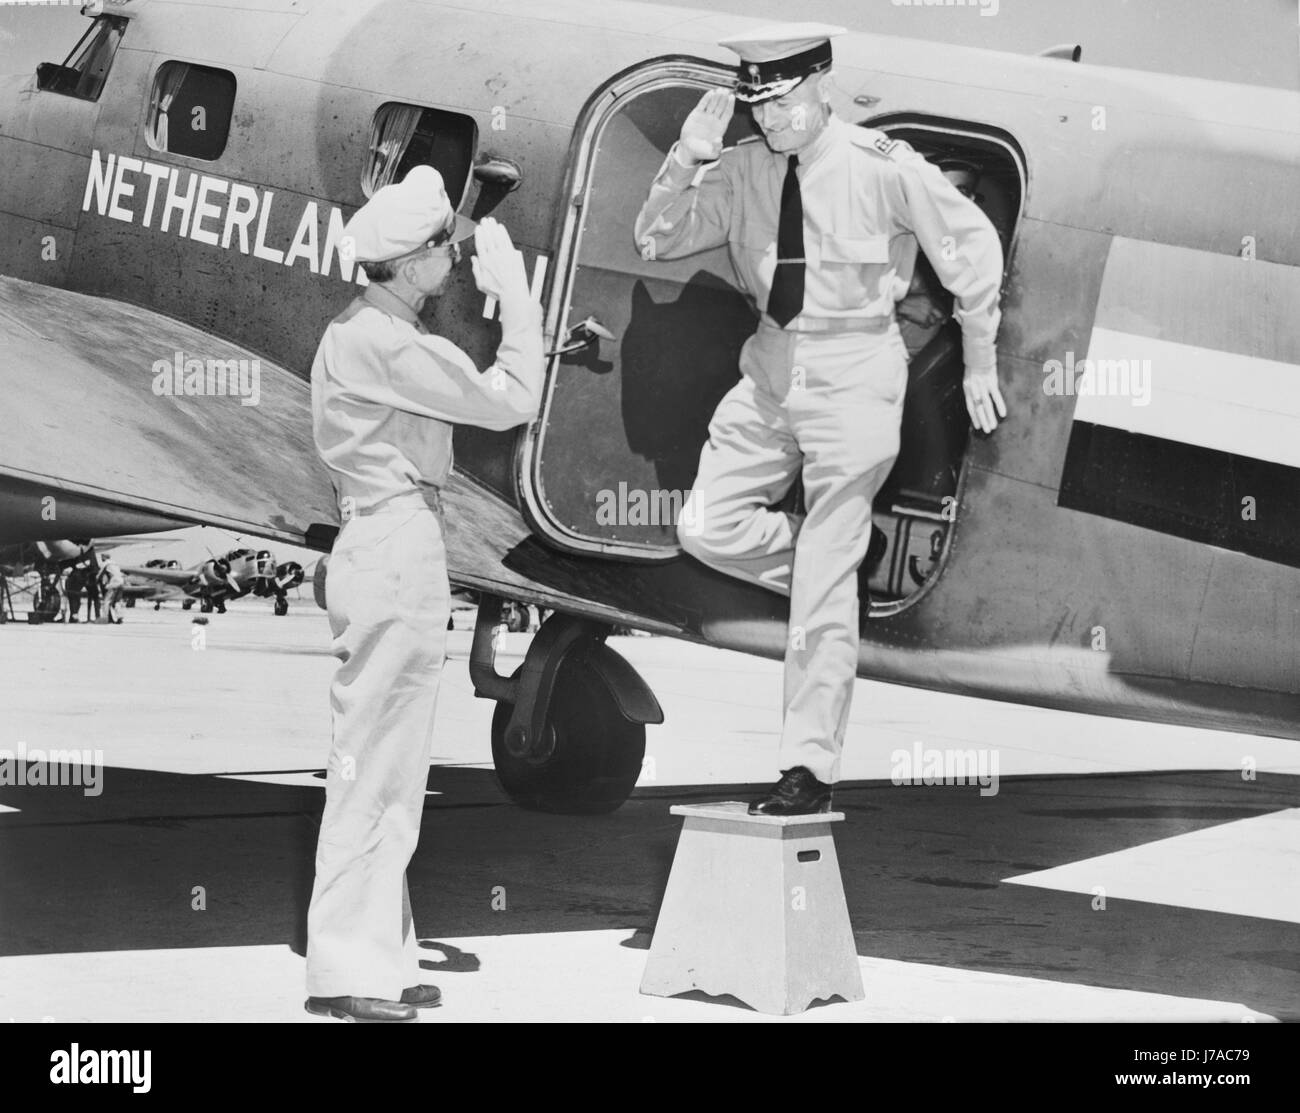 A Royal Netherlands Air Force  General exchanges salutes with a Brigadier General as he exits his aircraft, circa 1942. Stock Photo